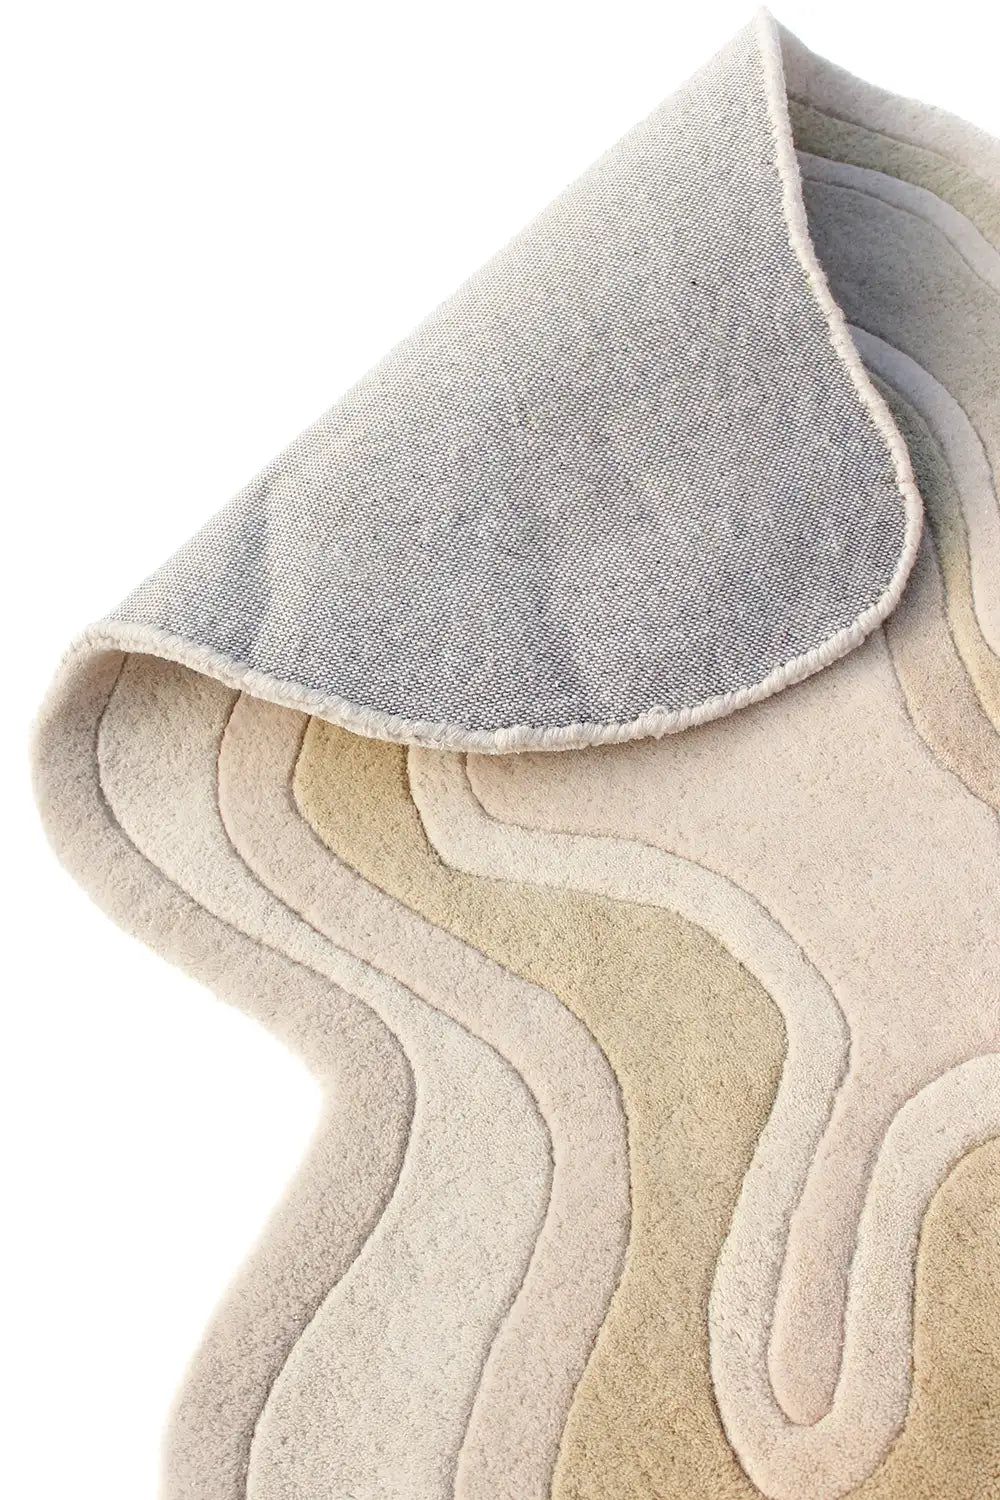 Beige Abstract Rolling Tides Rug - Soft and Plush for Modern Bedroom